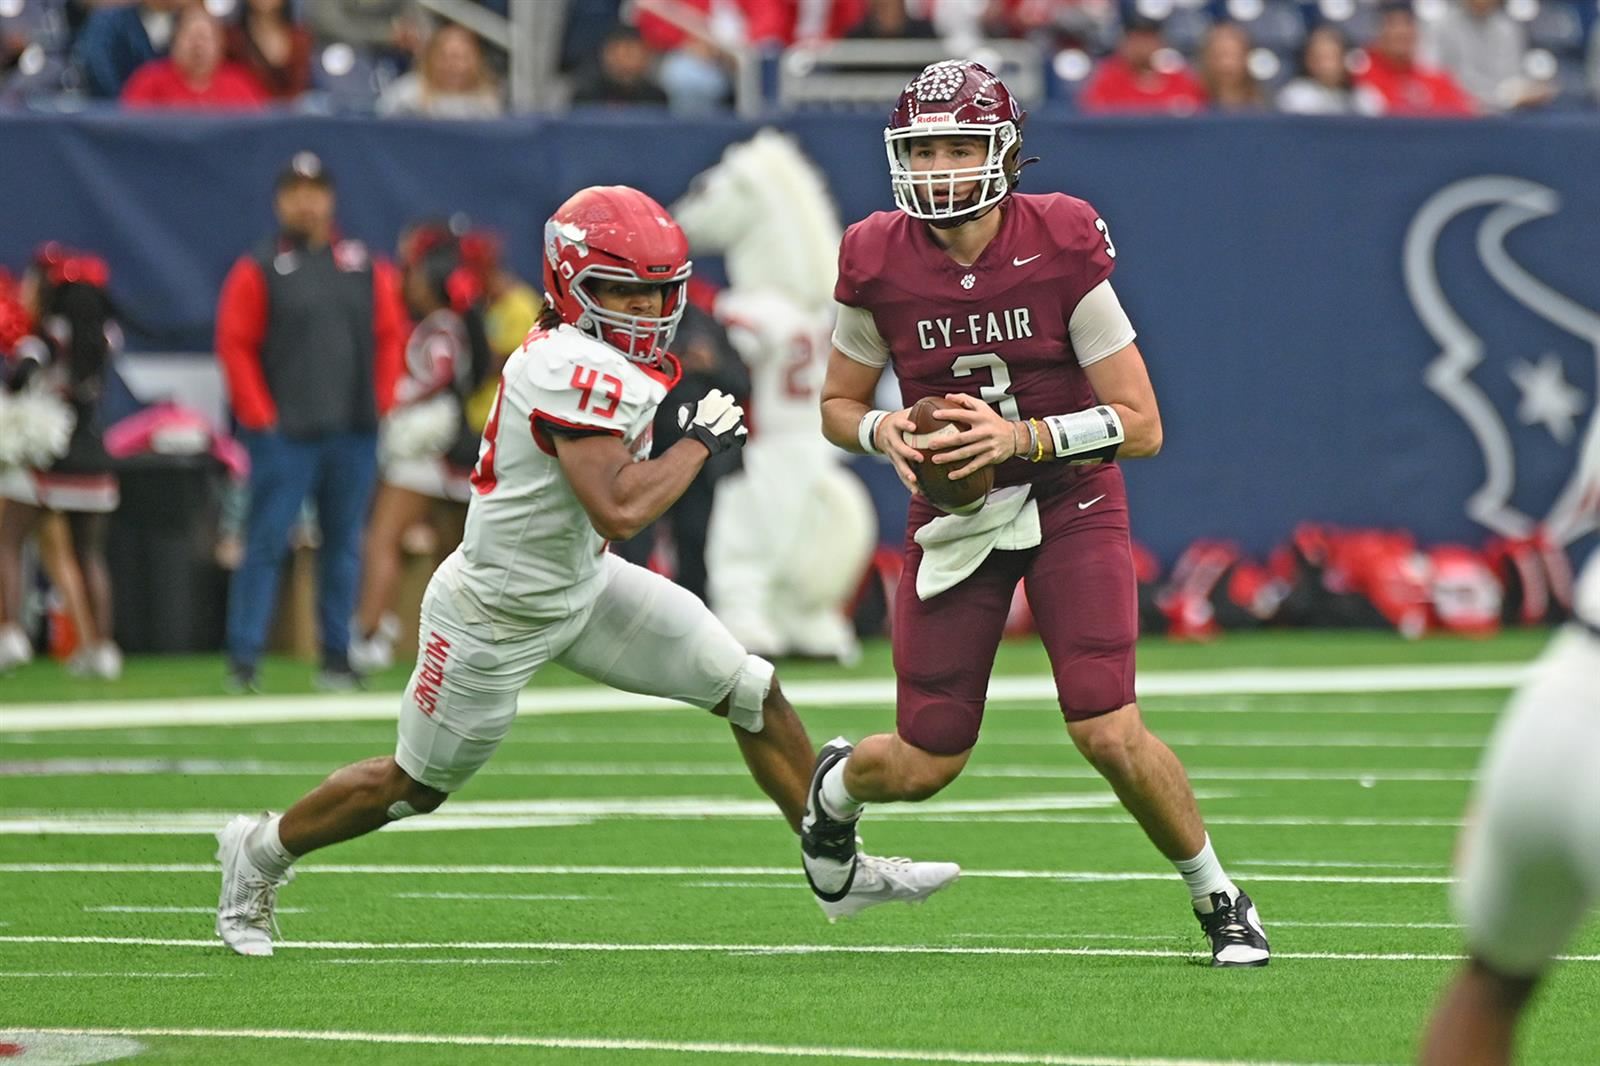 Cy-Fair High School senior quarterback Trey Owens was voted the District 17-6A Offensive MVP for a second consecutive season.